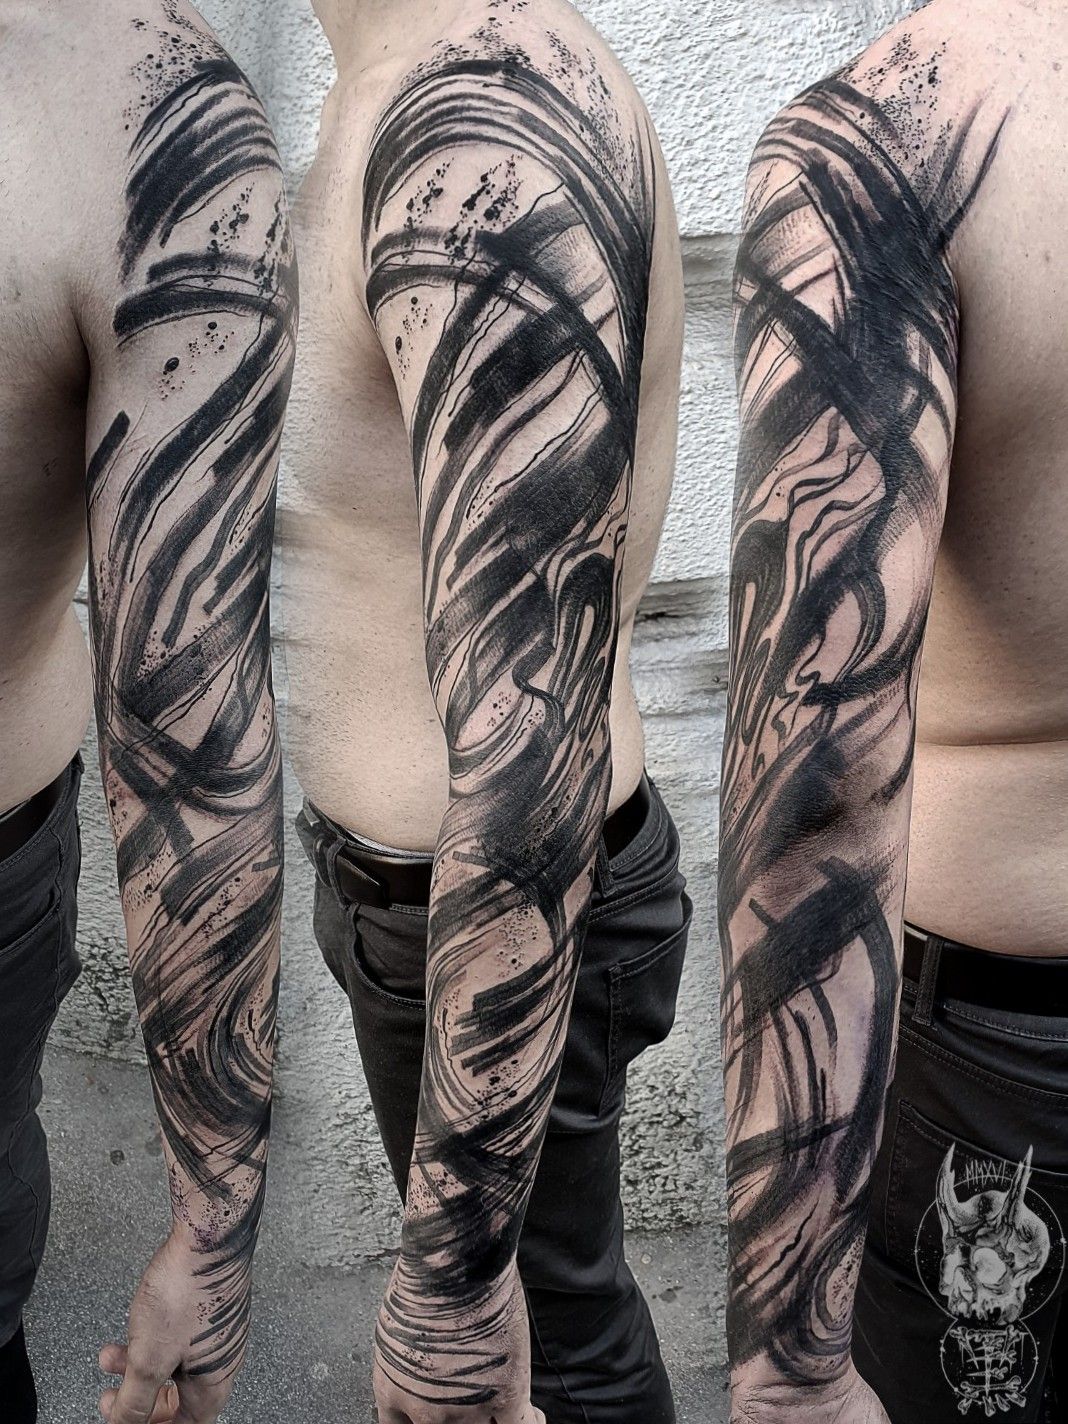 Looking for an artist that does abstract black work  more info in comments   rTattooDesigns